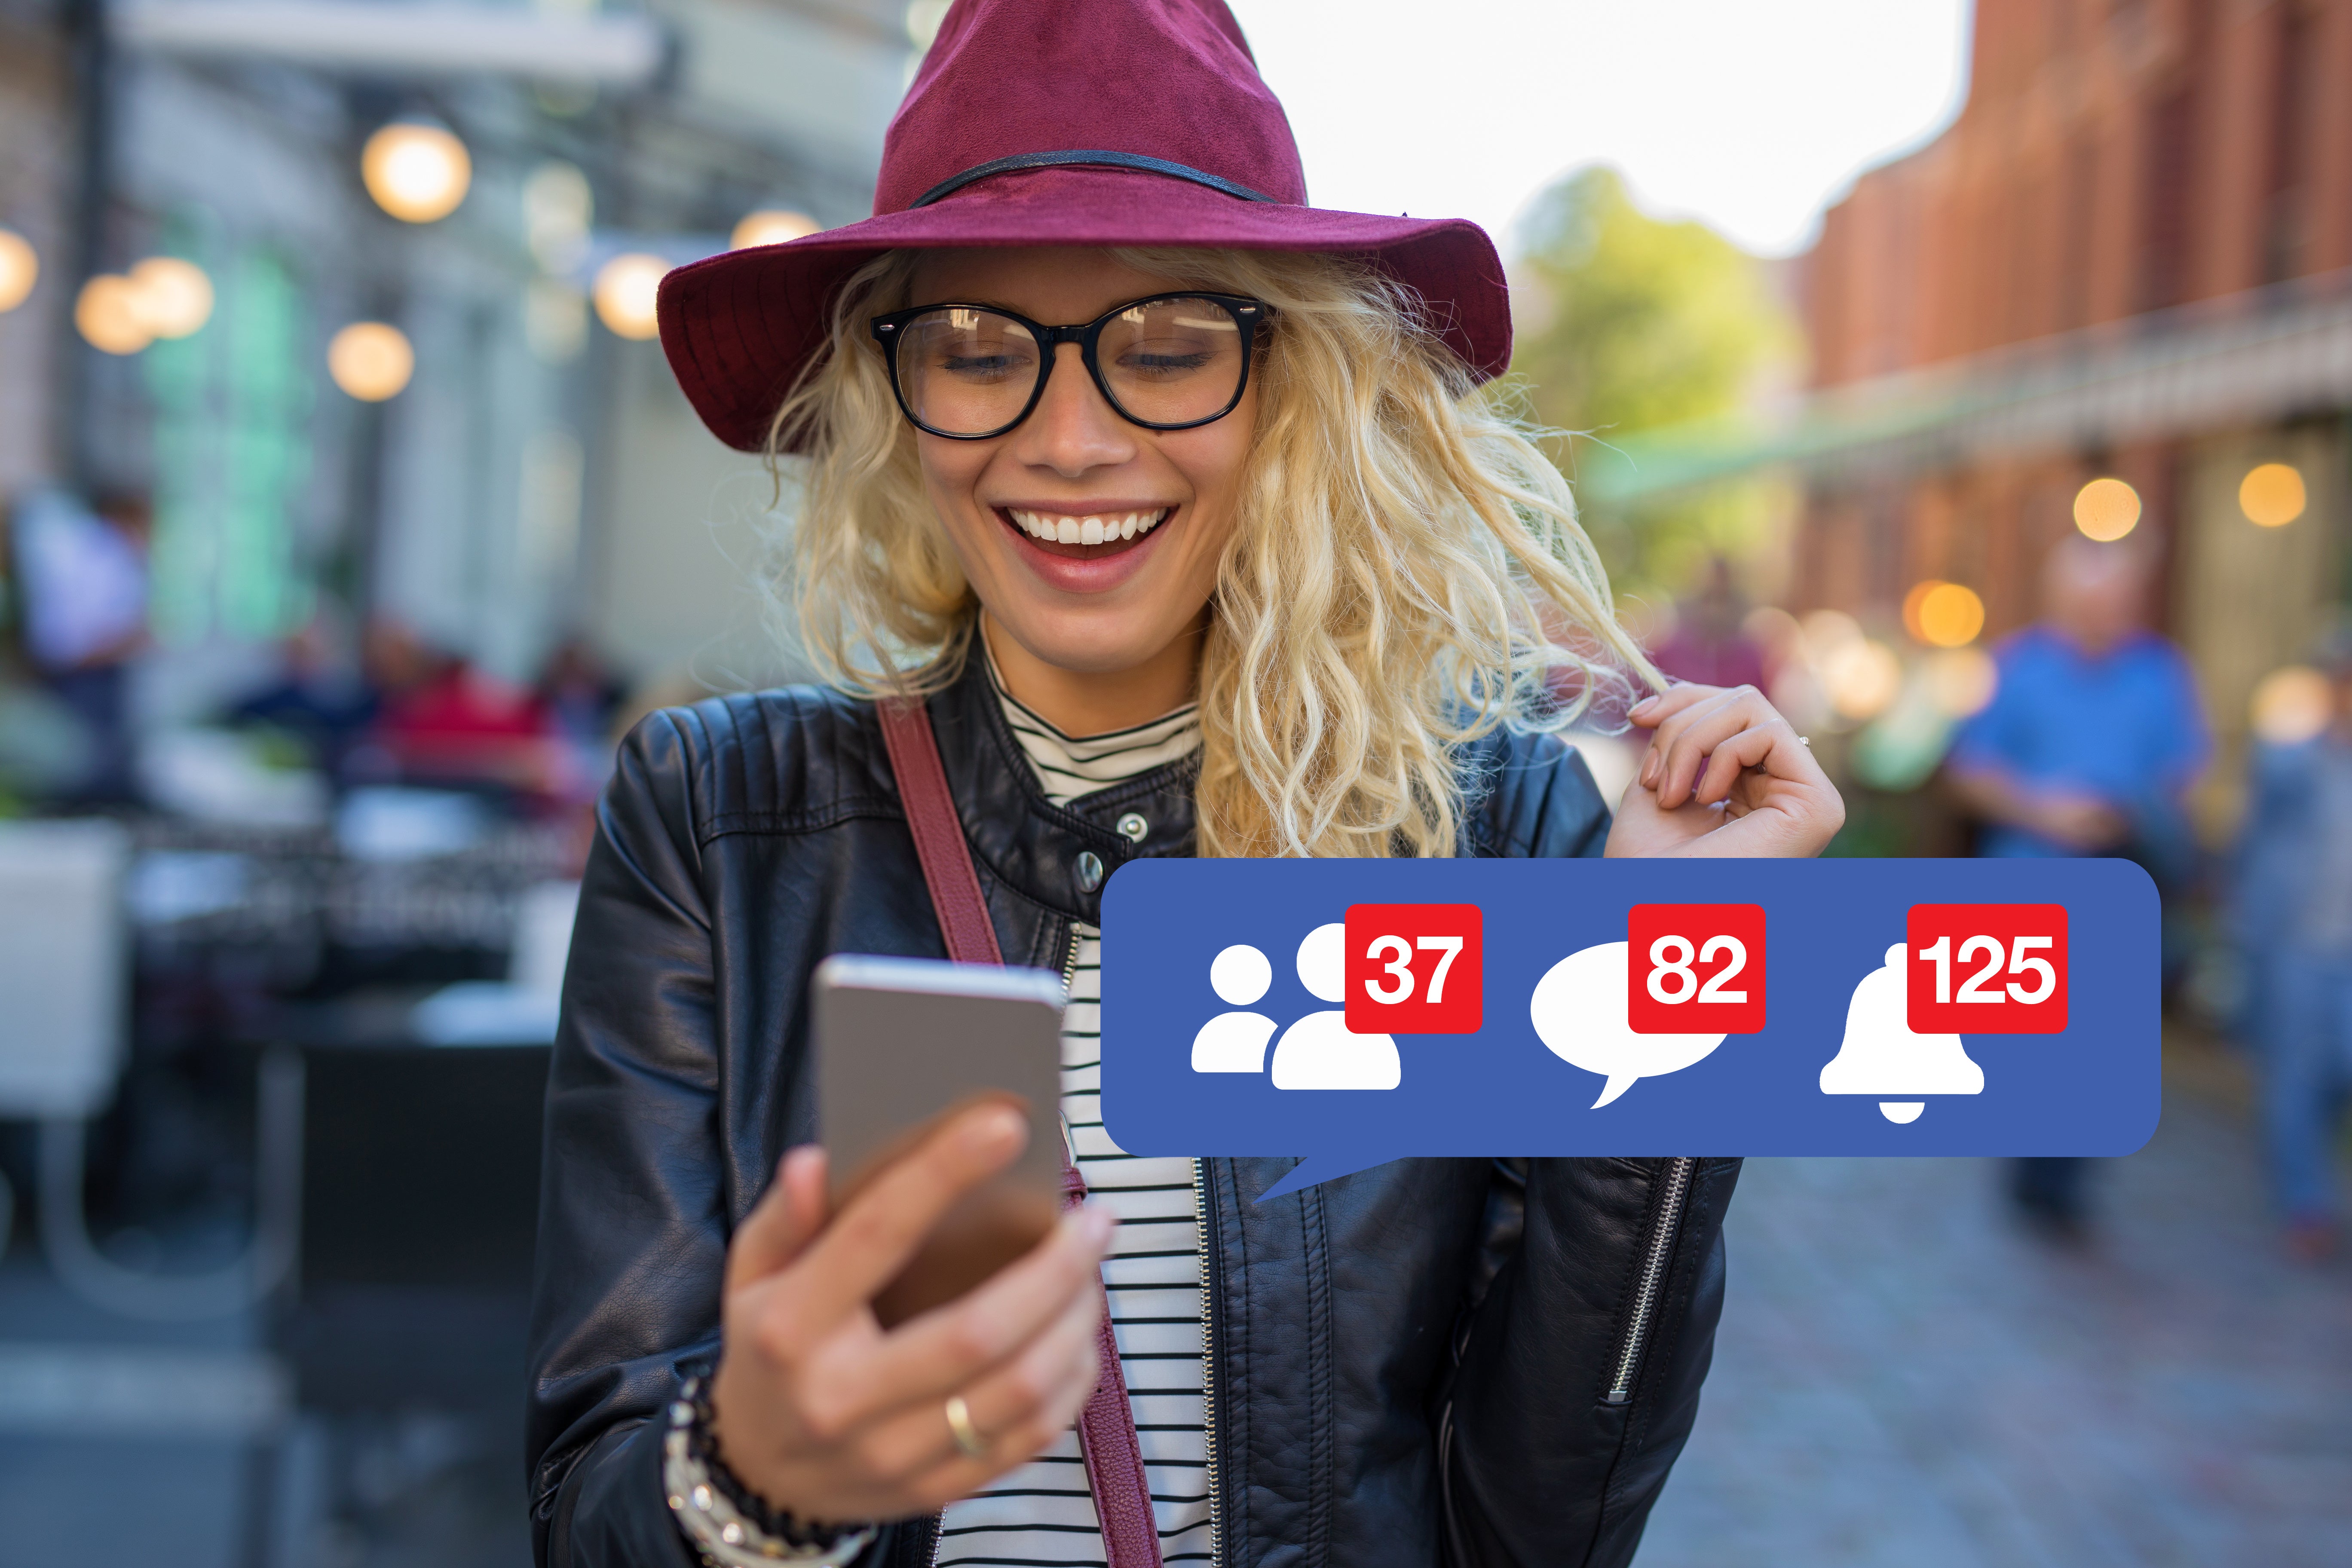 Influencers are used more and more in marketing in Croatia. 